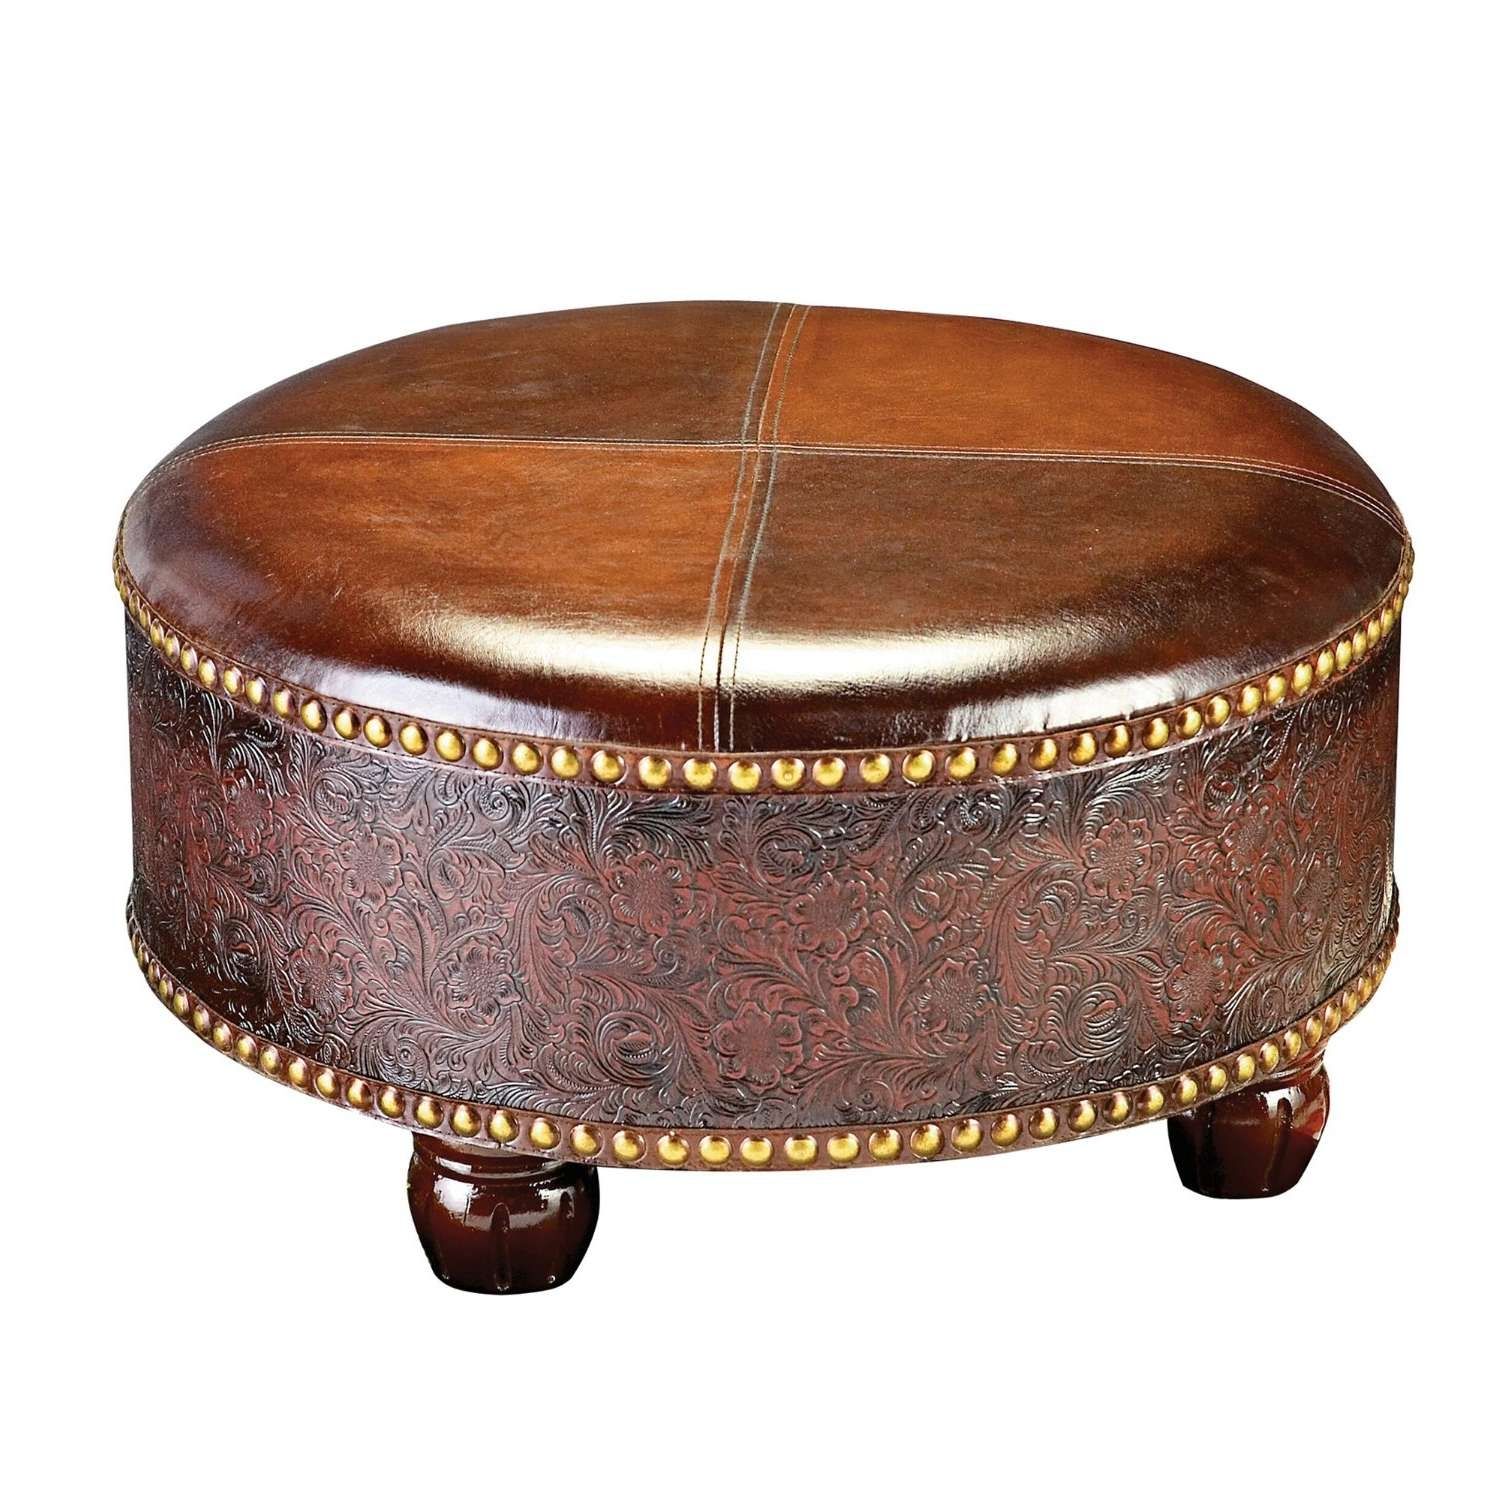 Widely Used Oversized Round Coffee Tables Inside Coffee Table, Decoration Ottoman Storage Tufted Round Leather (Gallery 20 of 20)